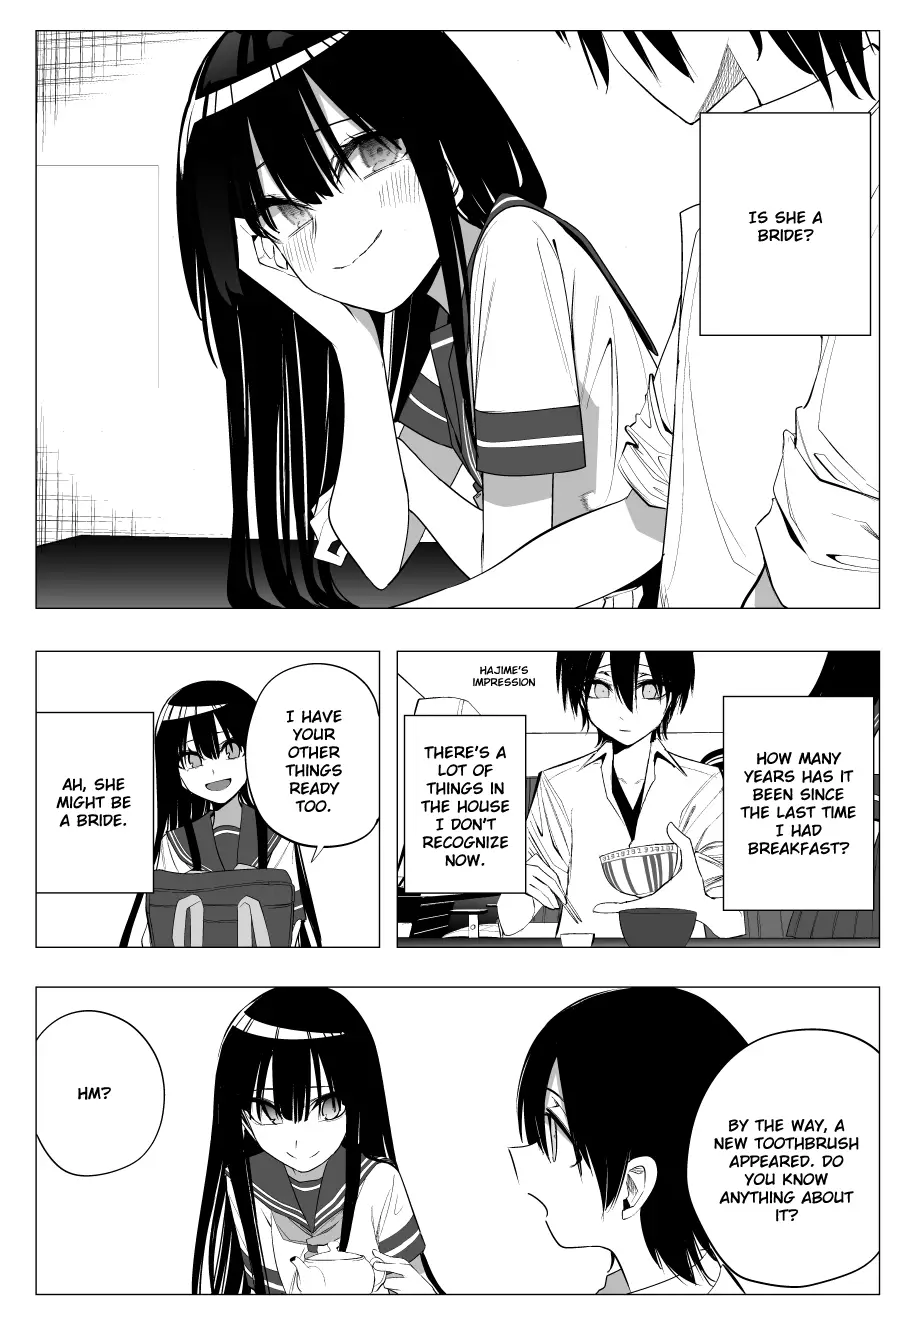 Mitsuishi-San Is Being Weird This Year - 29 page 5-e9ae597b